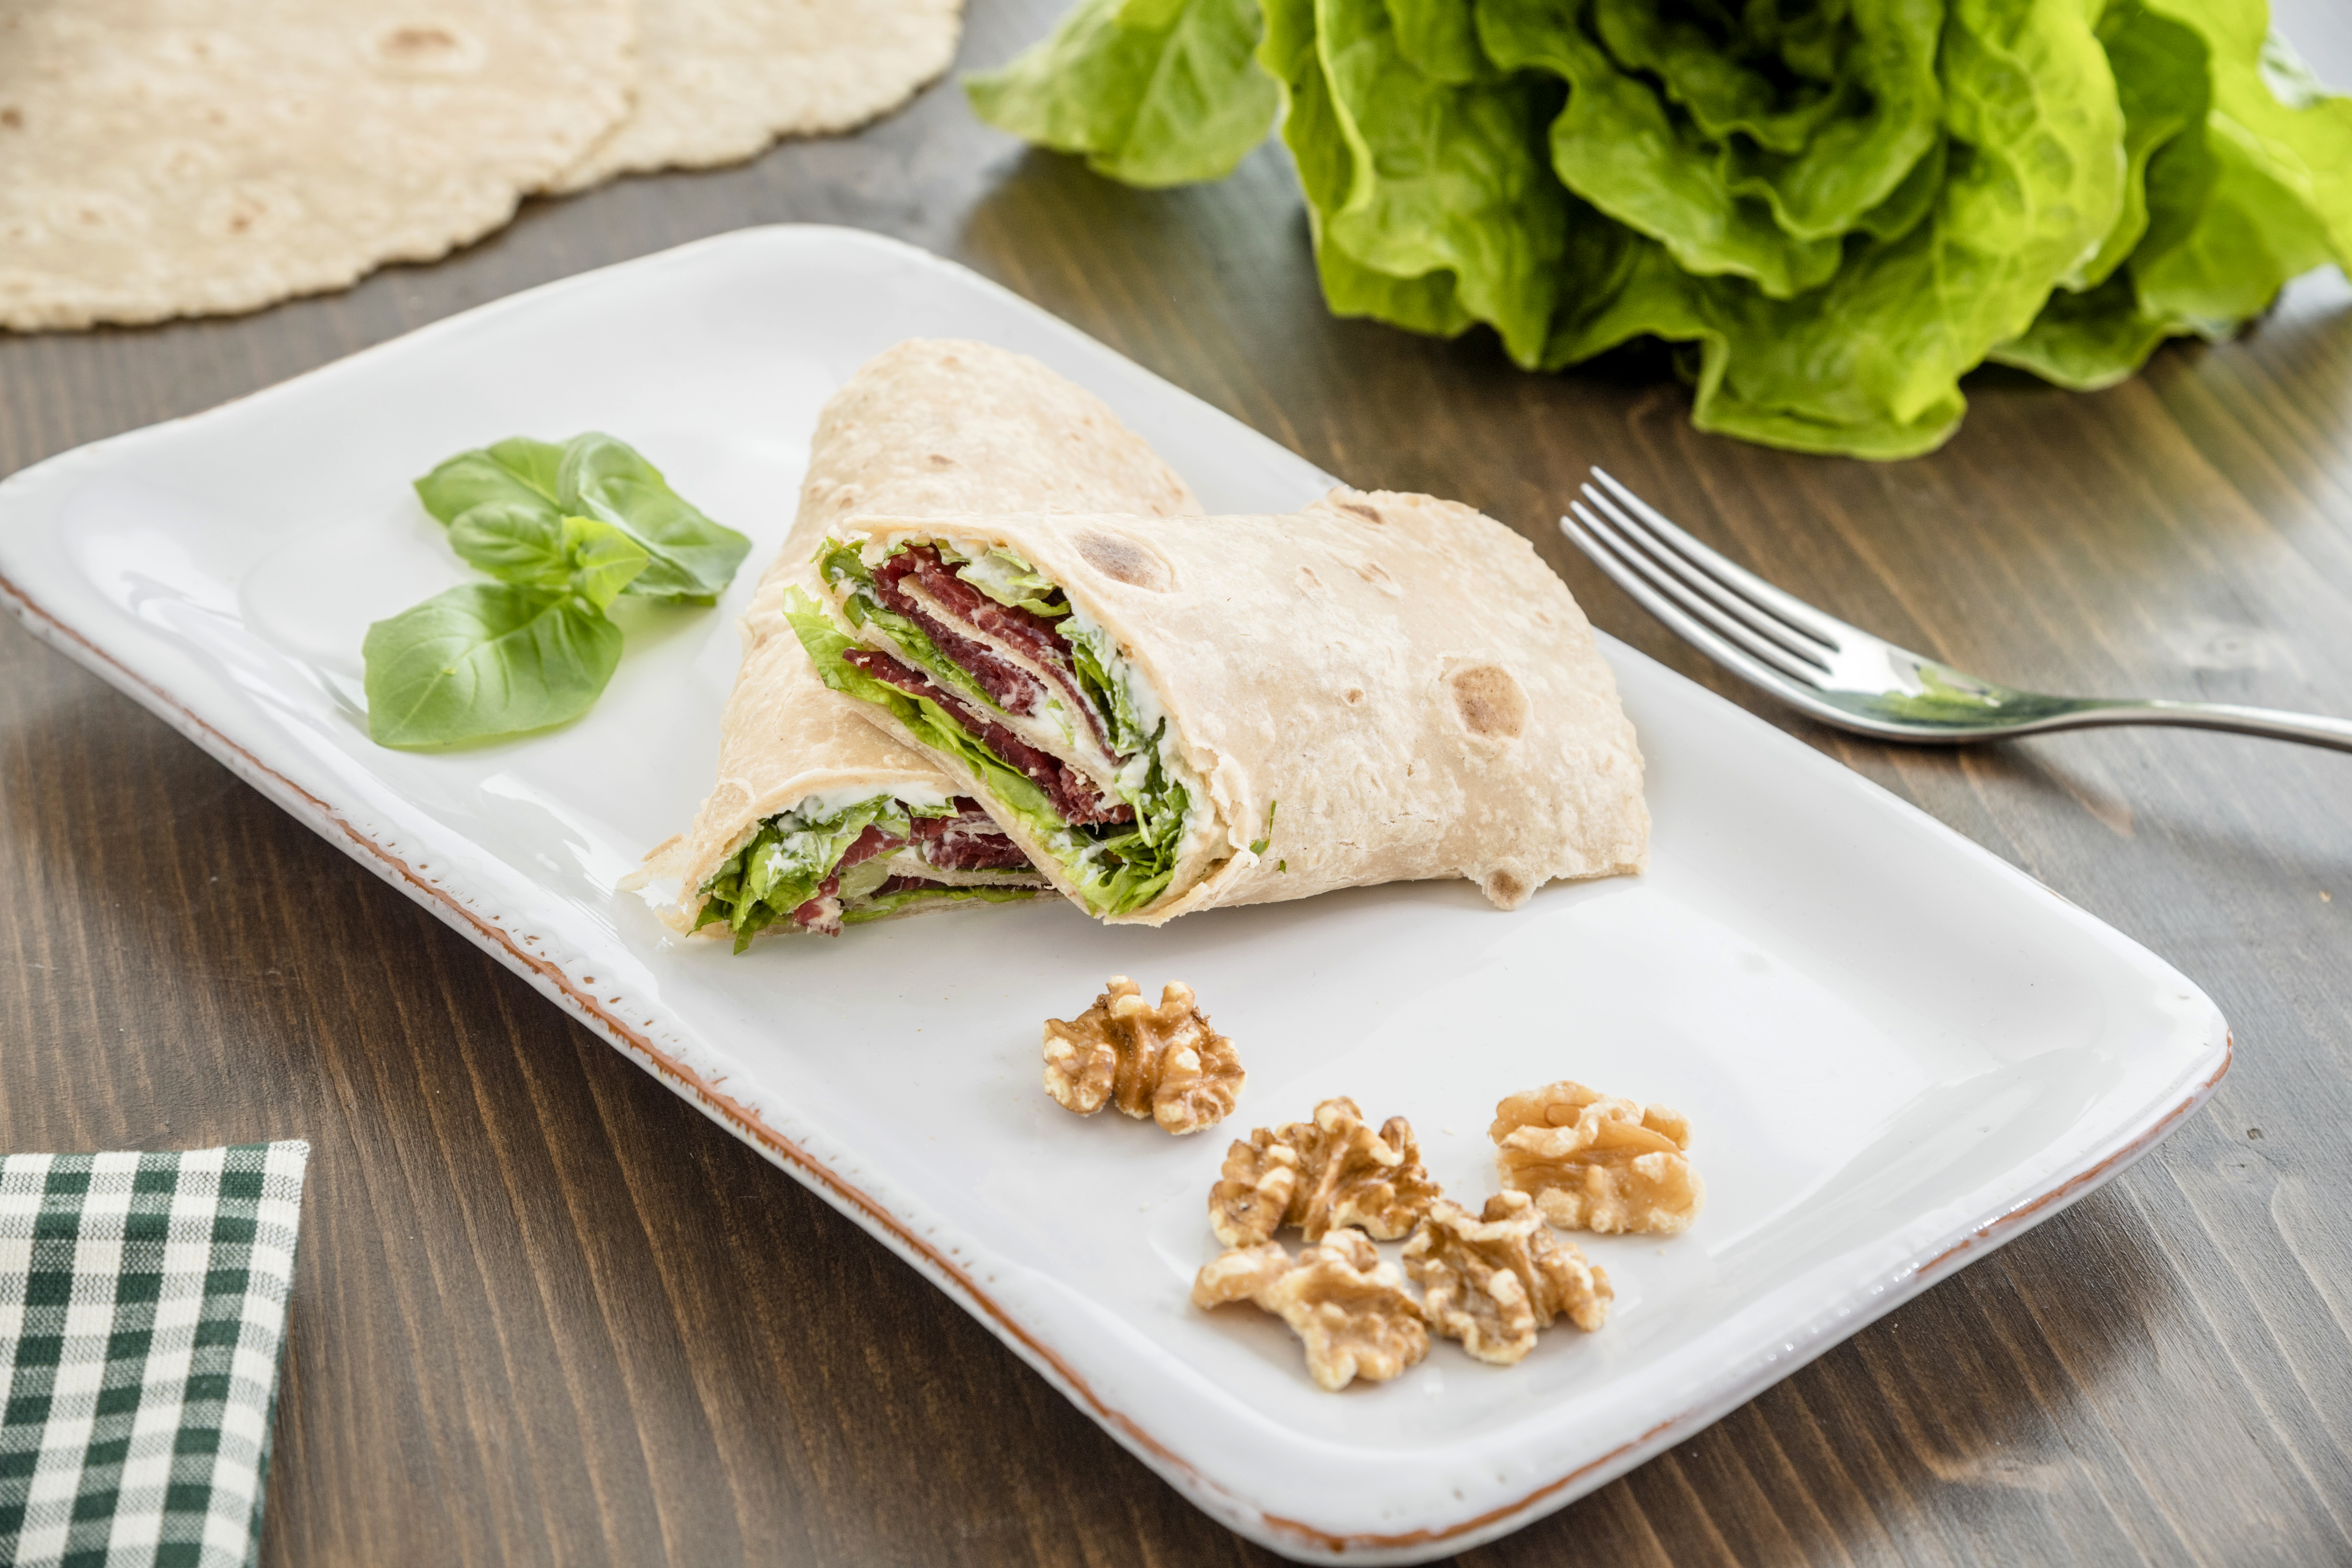 Gluten-free wraps with Valtellina bresaola, paprika-flavored cream cheese, walnuts kernels and crispy salad joulinne